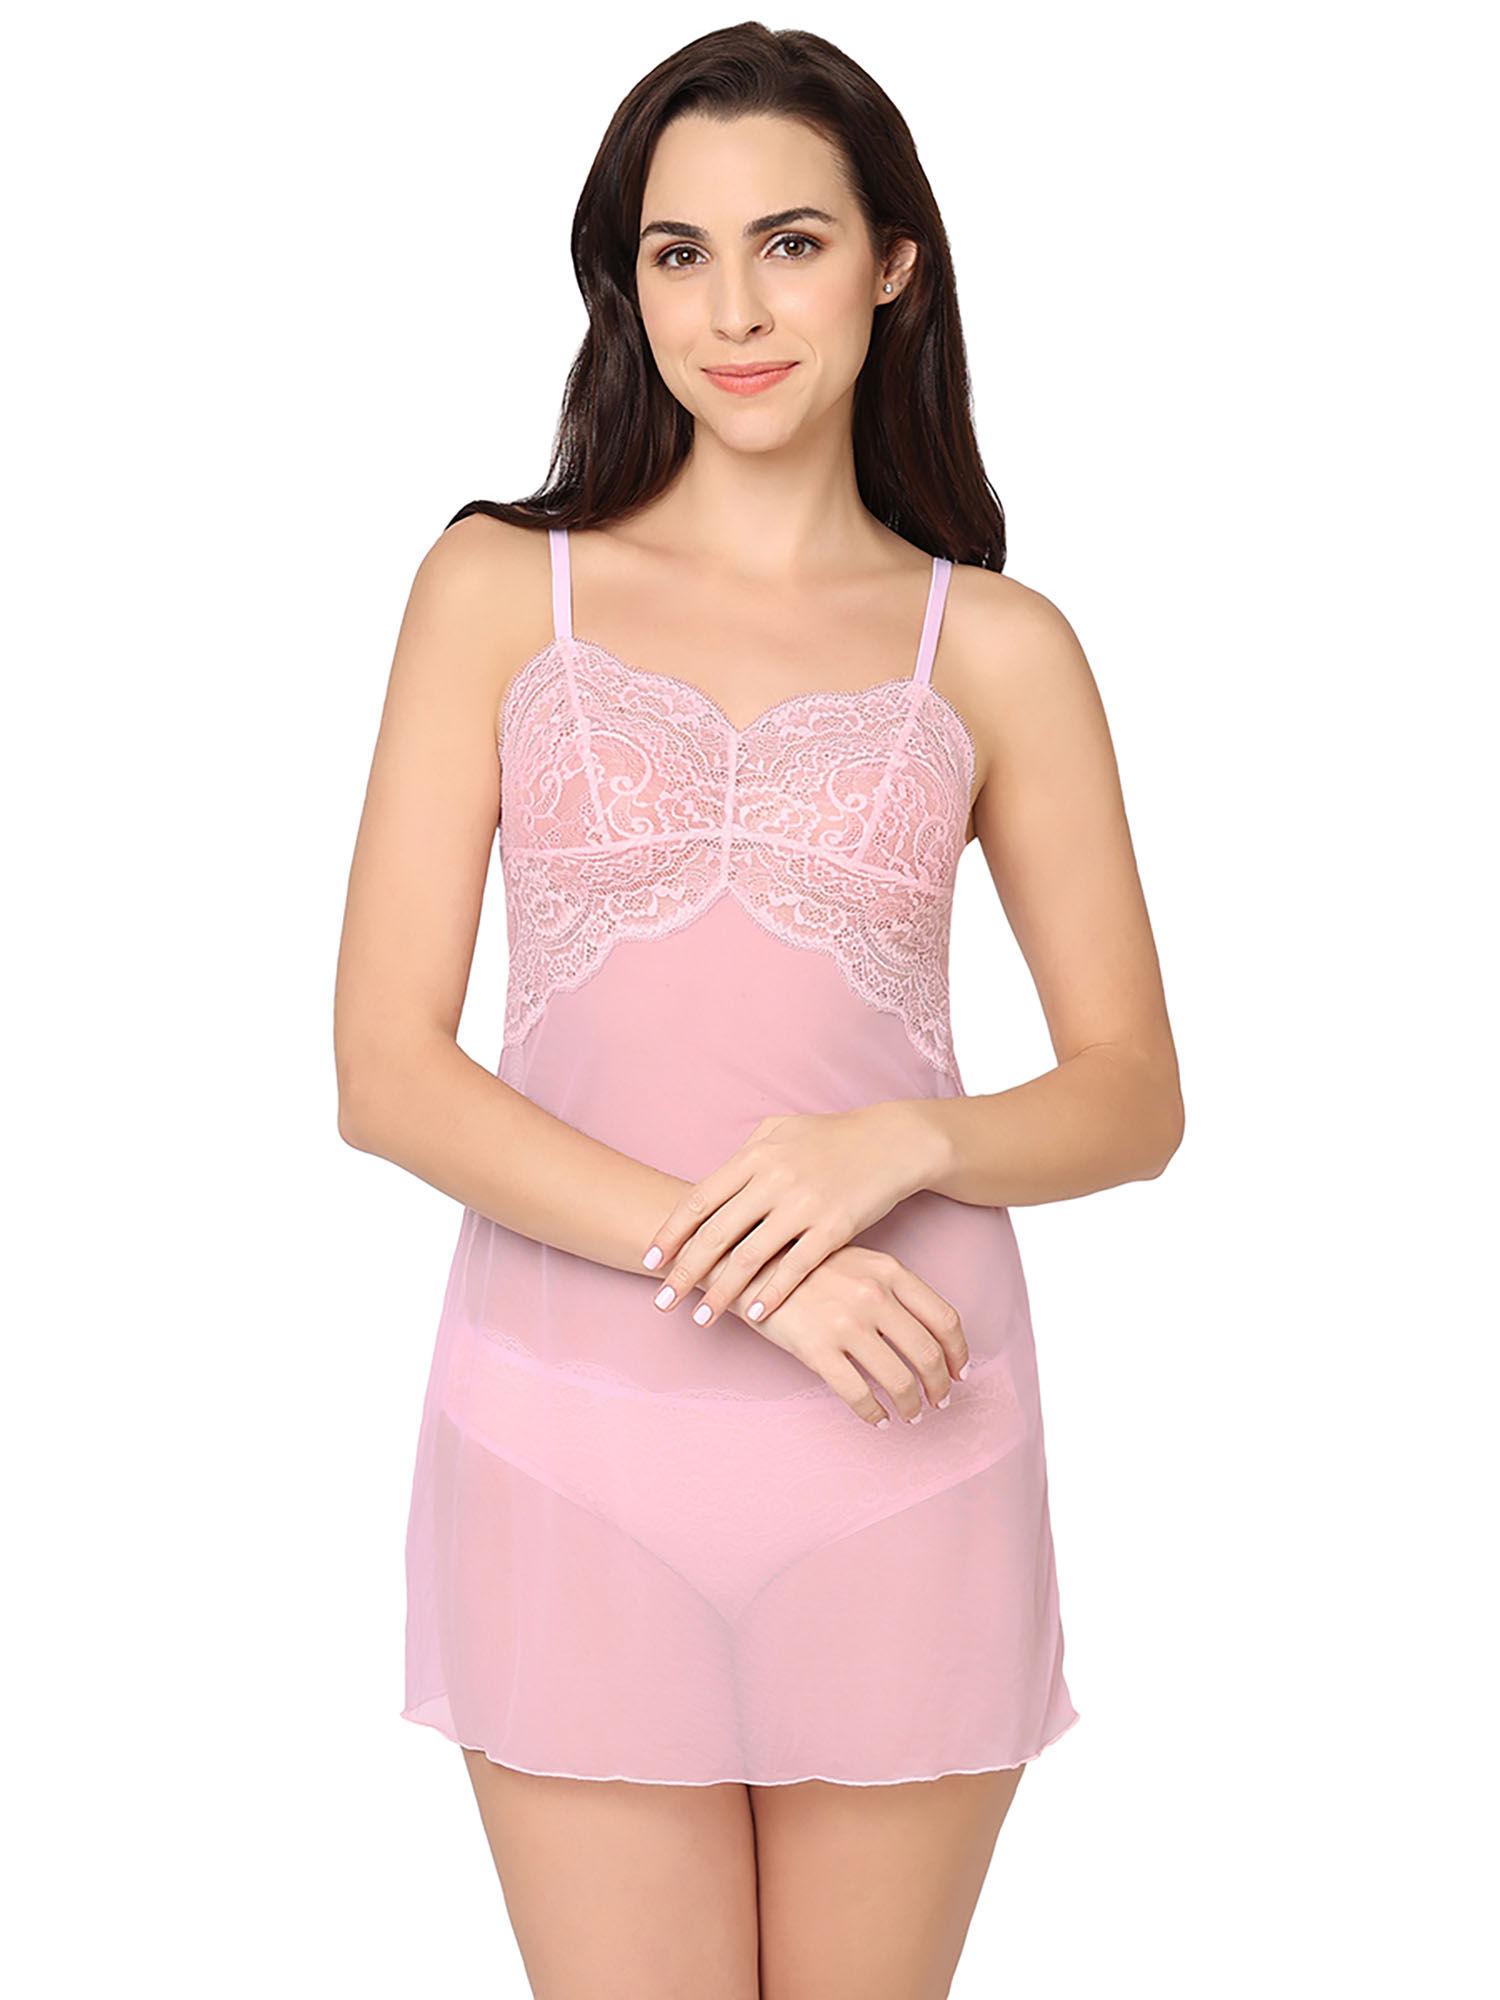 india essential lace short lacy babydoll chemise pink